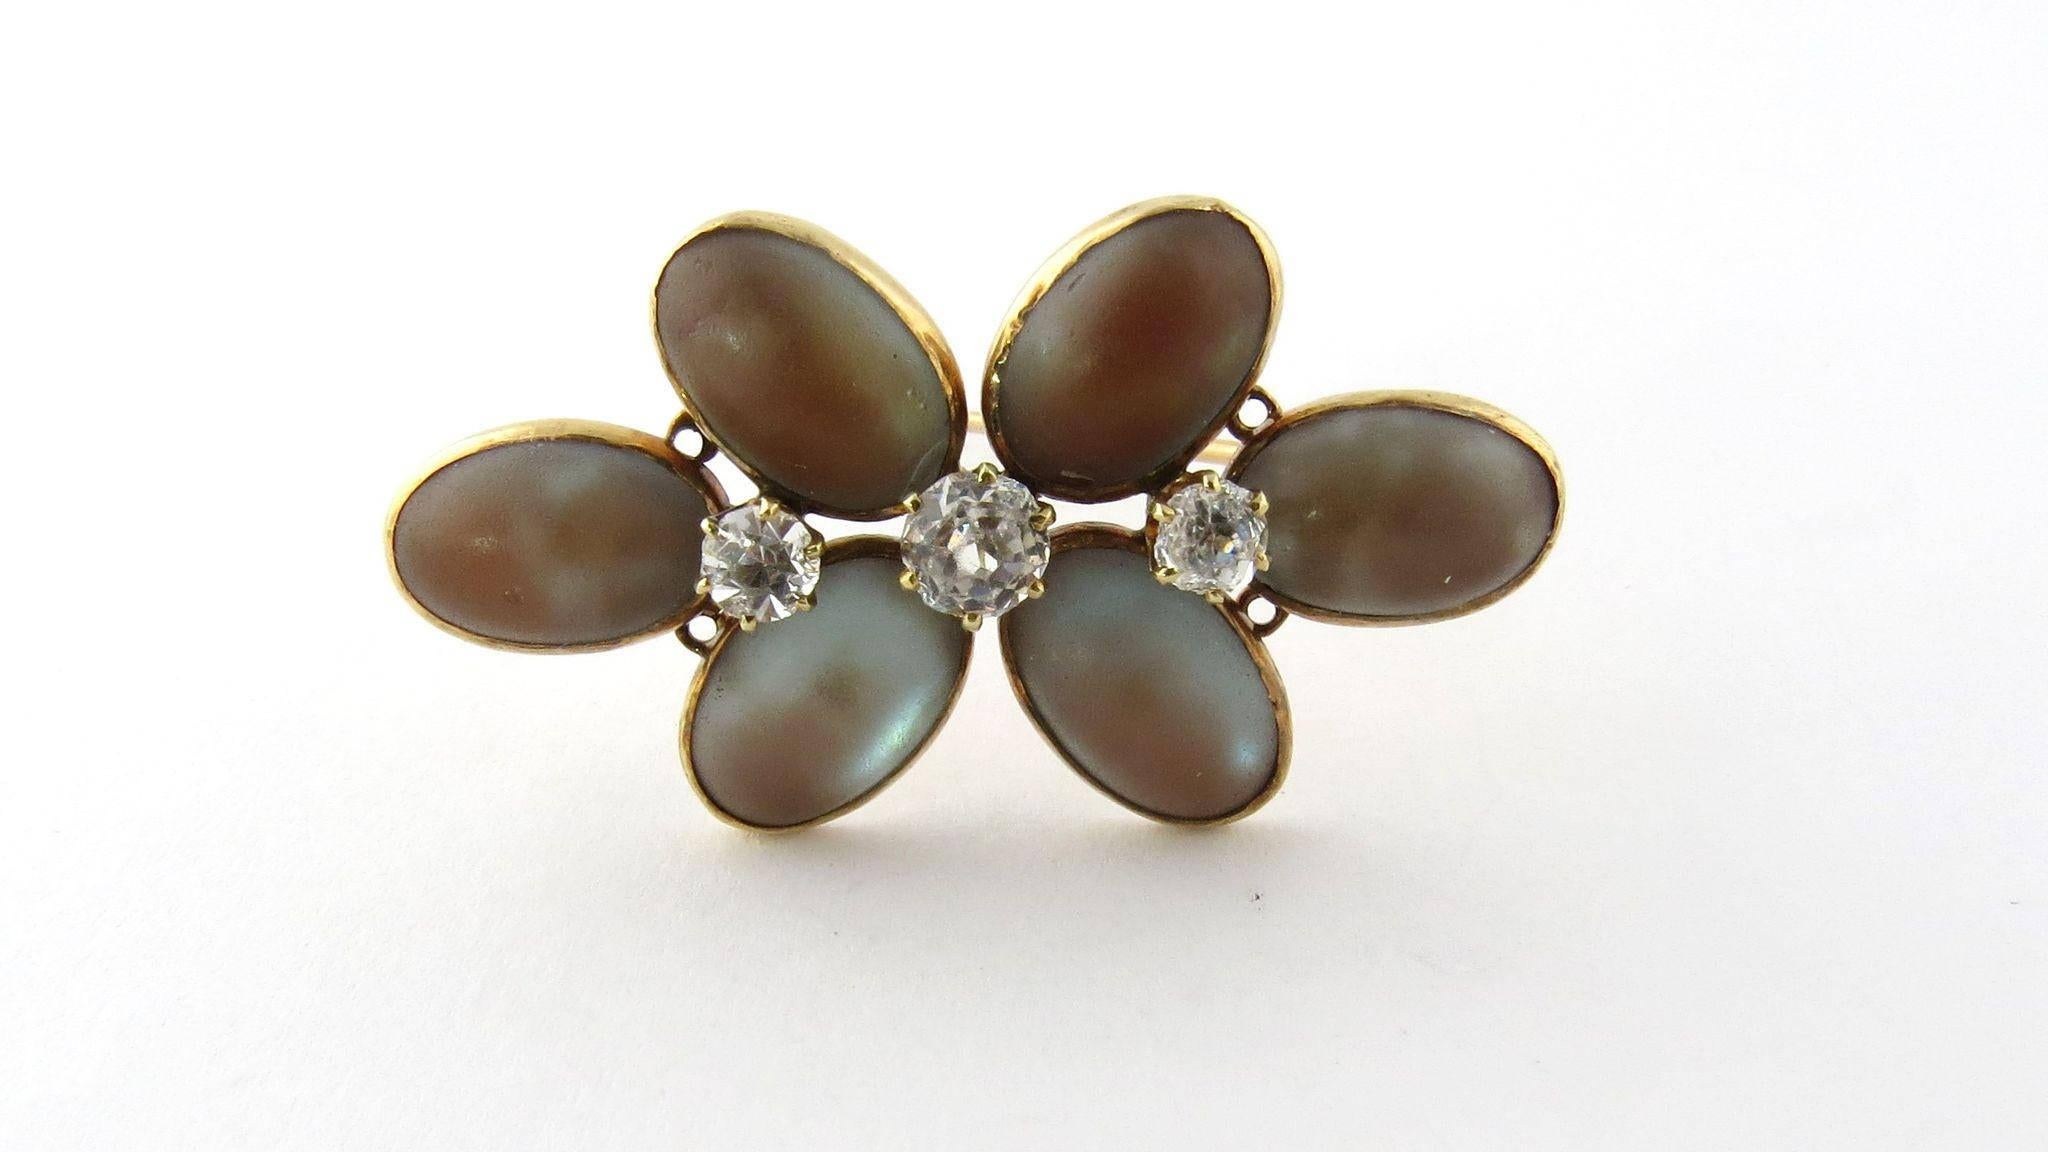 Victorian 14K Yellow Gold Saphrite and Spinel Flower Brooch Pin. 

Bezel set saphrites surround 3 spinel flower centers in this well crafted antique brooch. 

Measures: 41mm x 23mm. 
Weighs 9.3g, 5.95dwt 
Sits 7mm high. 
Acid tested for purity and